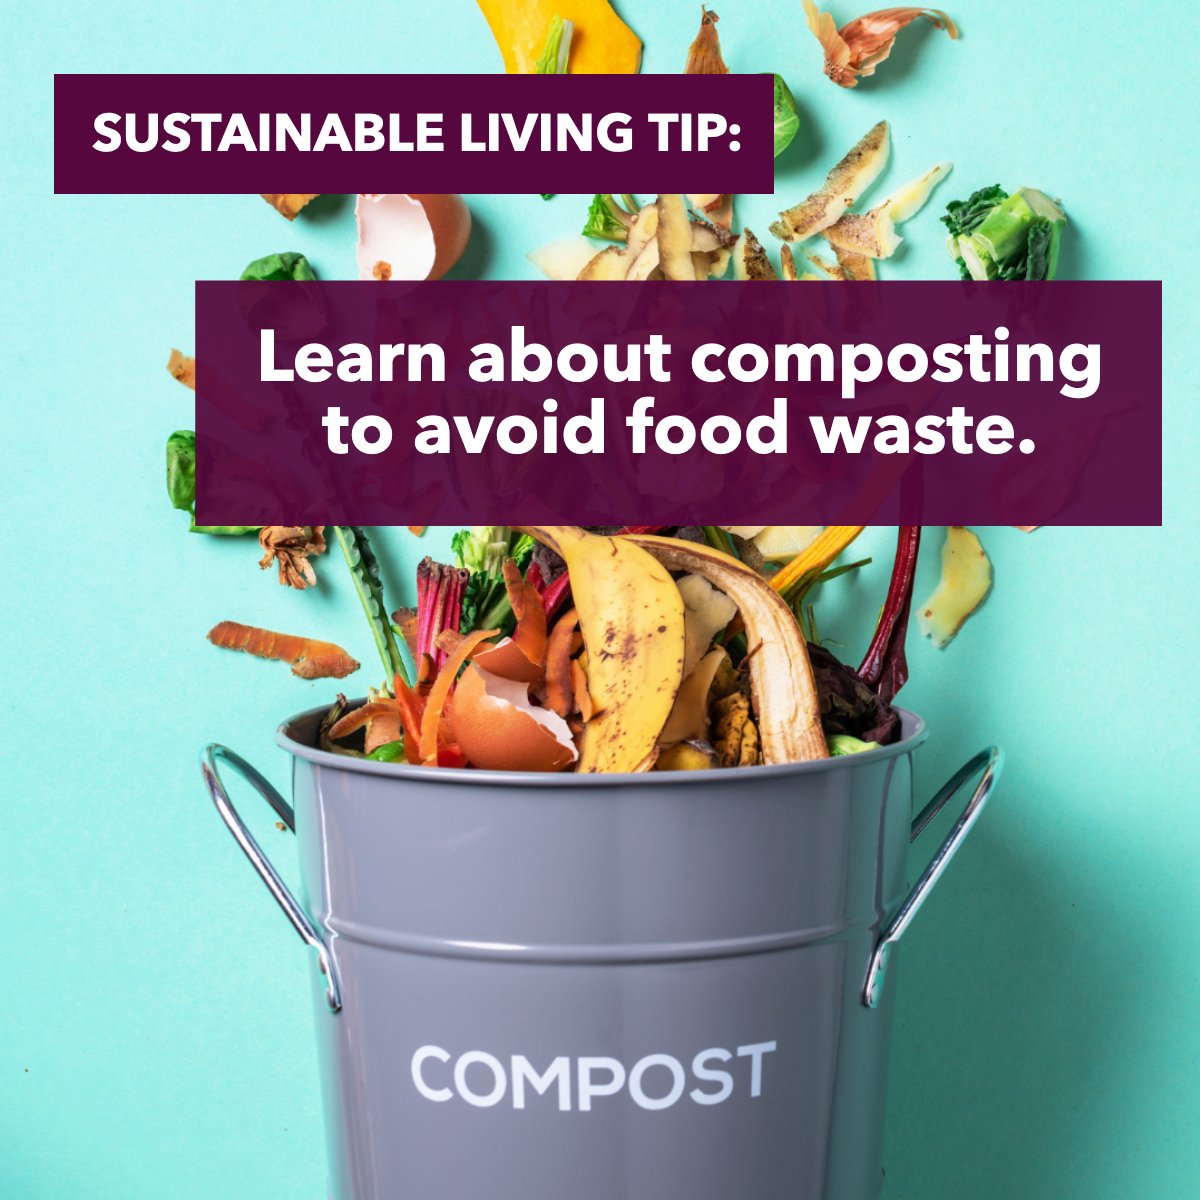 Have you tried composting? Tell me your experience in the comments! 💭

#sustainablelifestyle #sustainable #sustainablity #composting